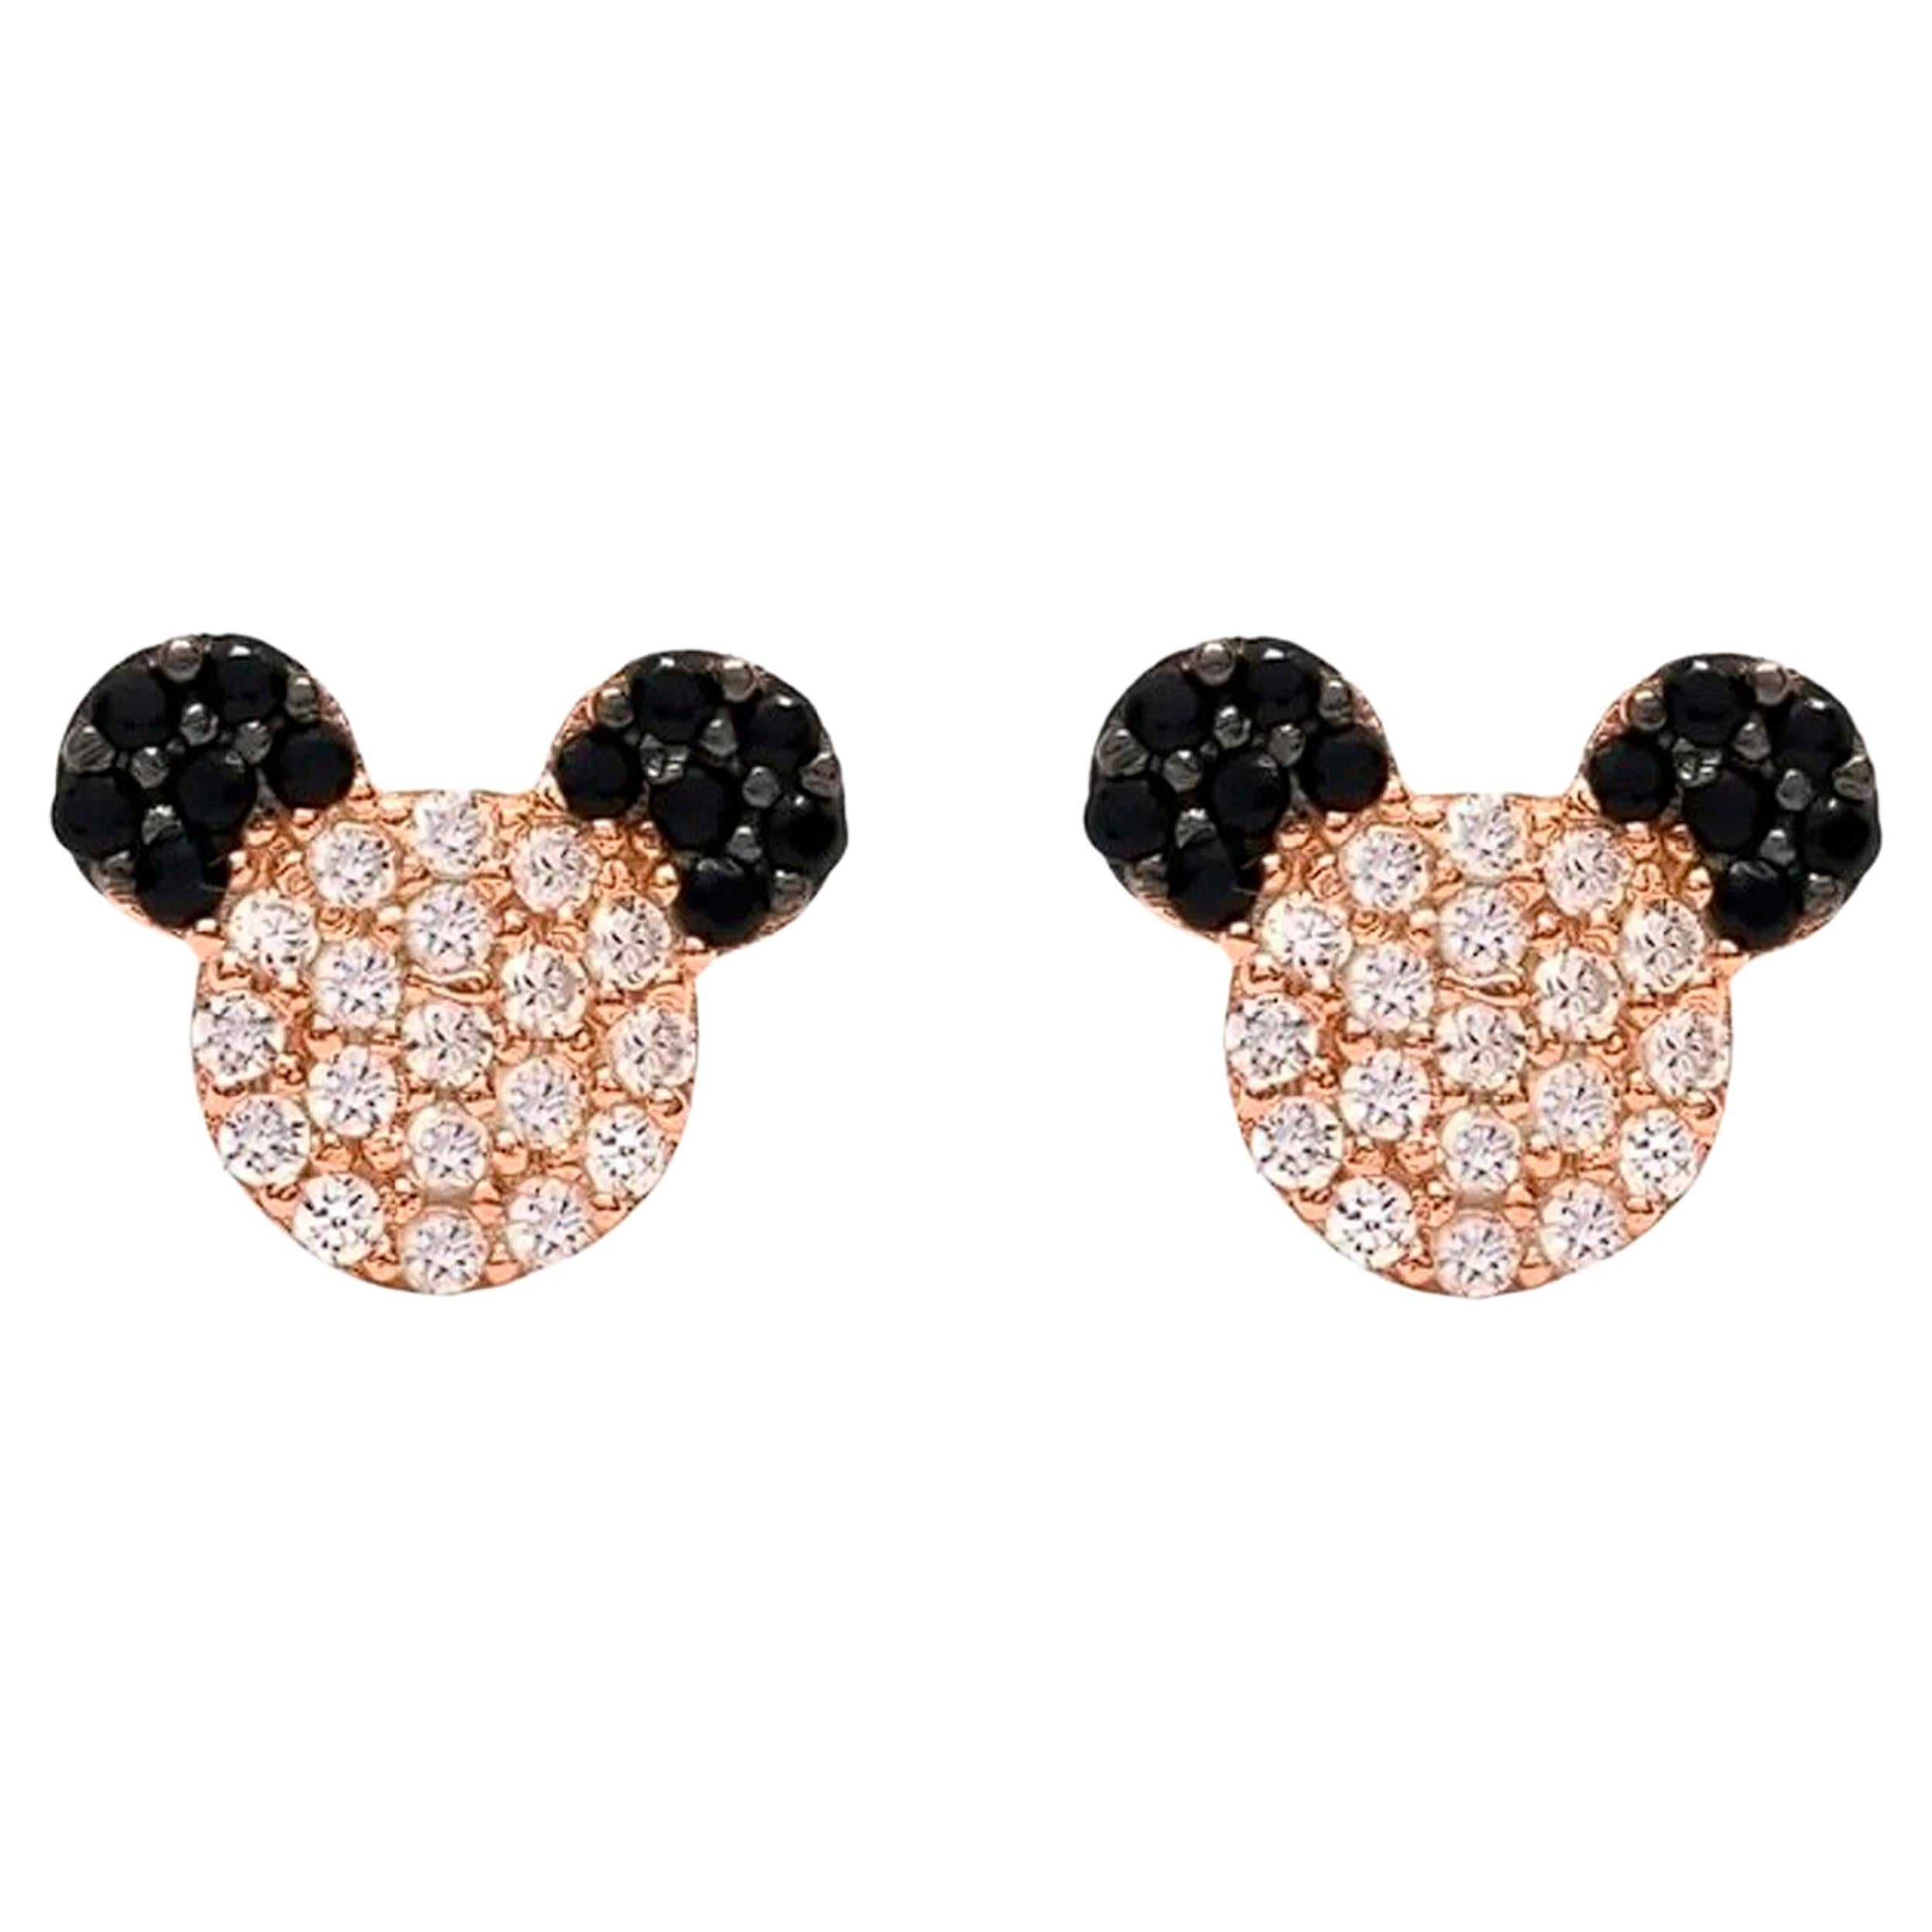 Minnie Mouse 14k gold Earrings Studs with gemstones